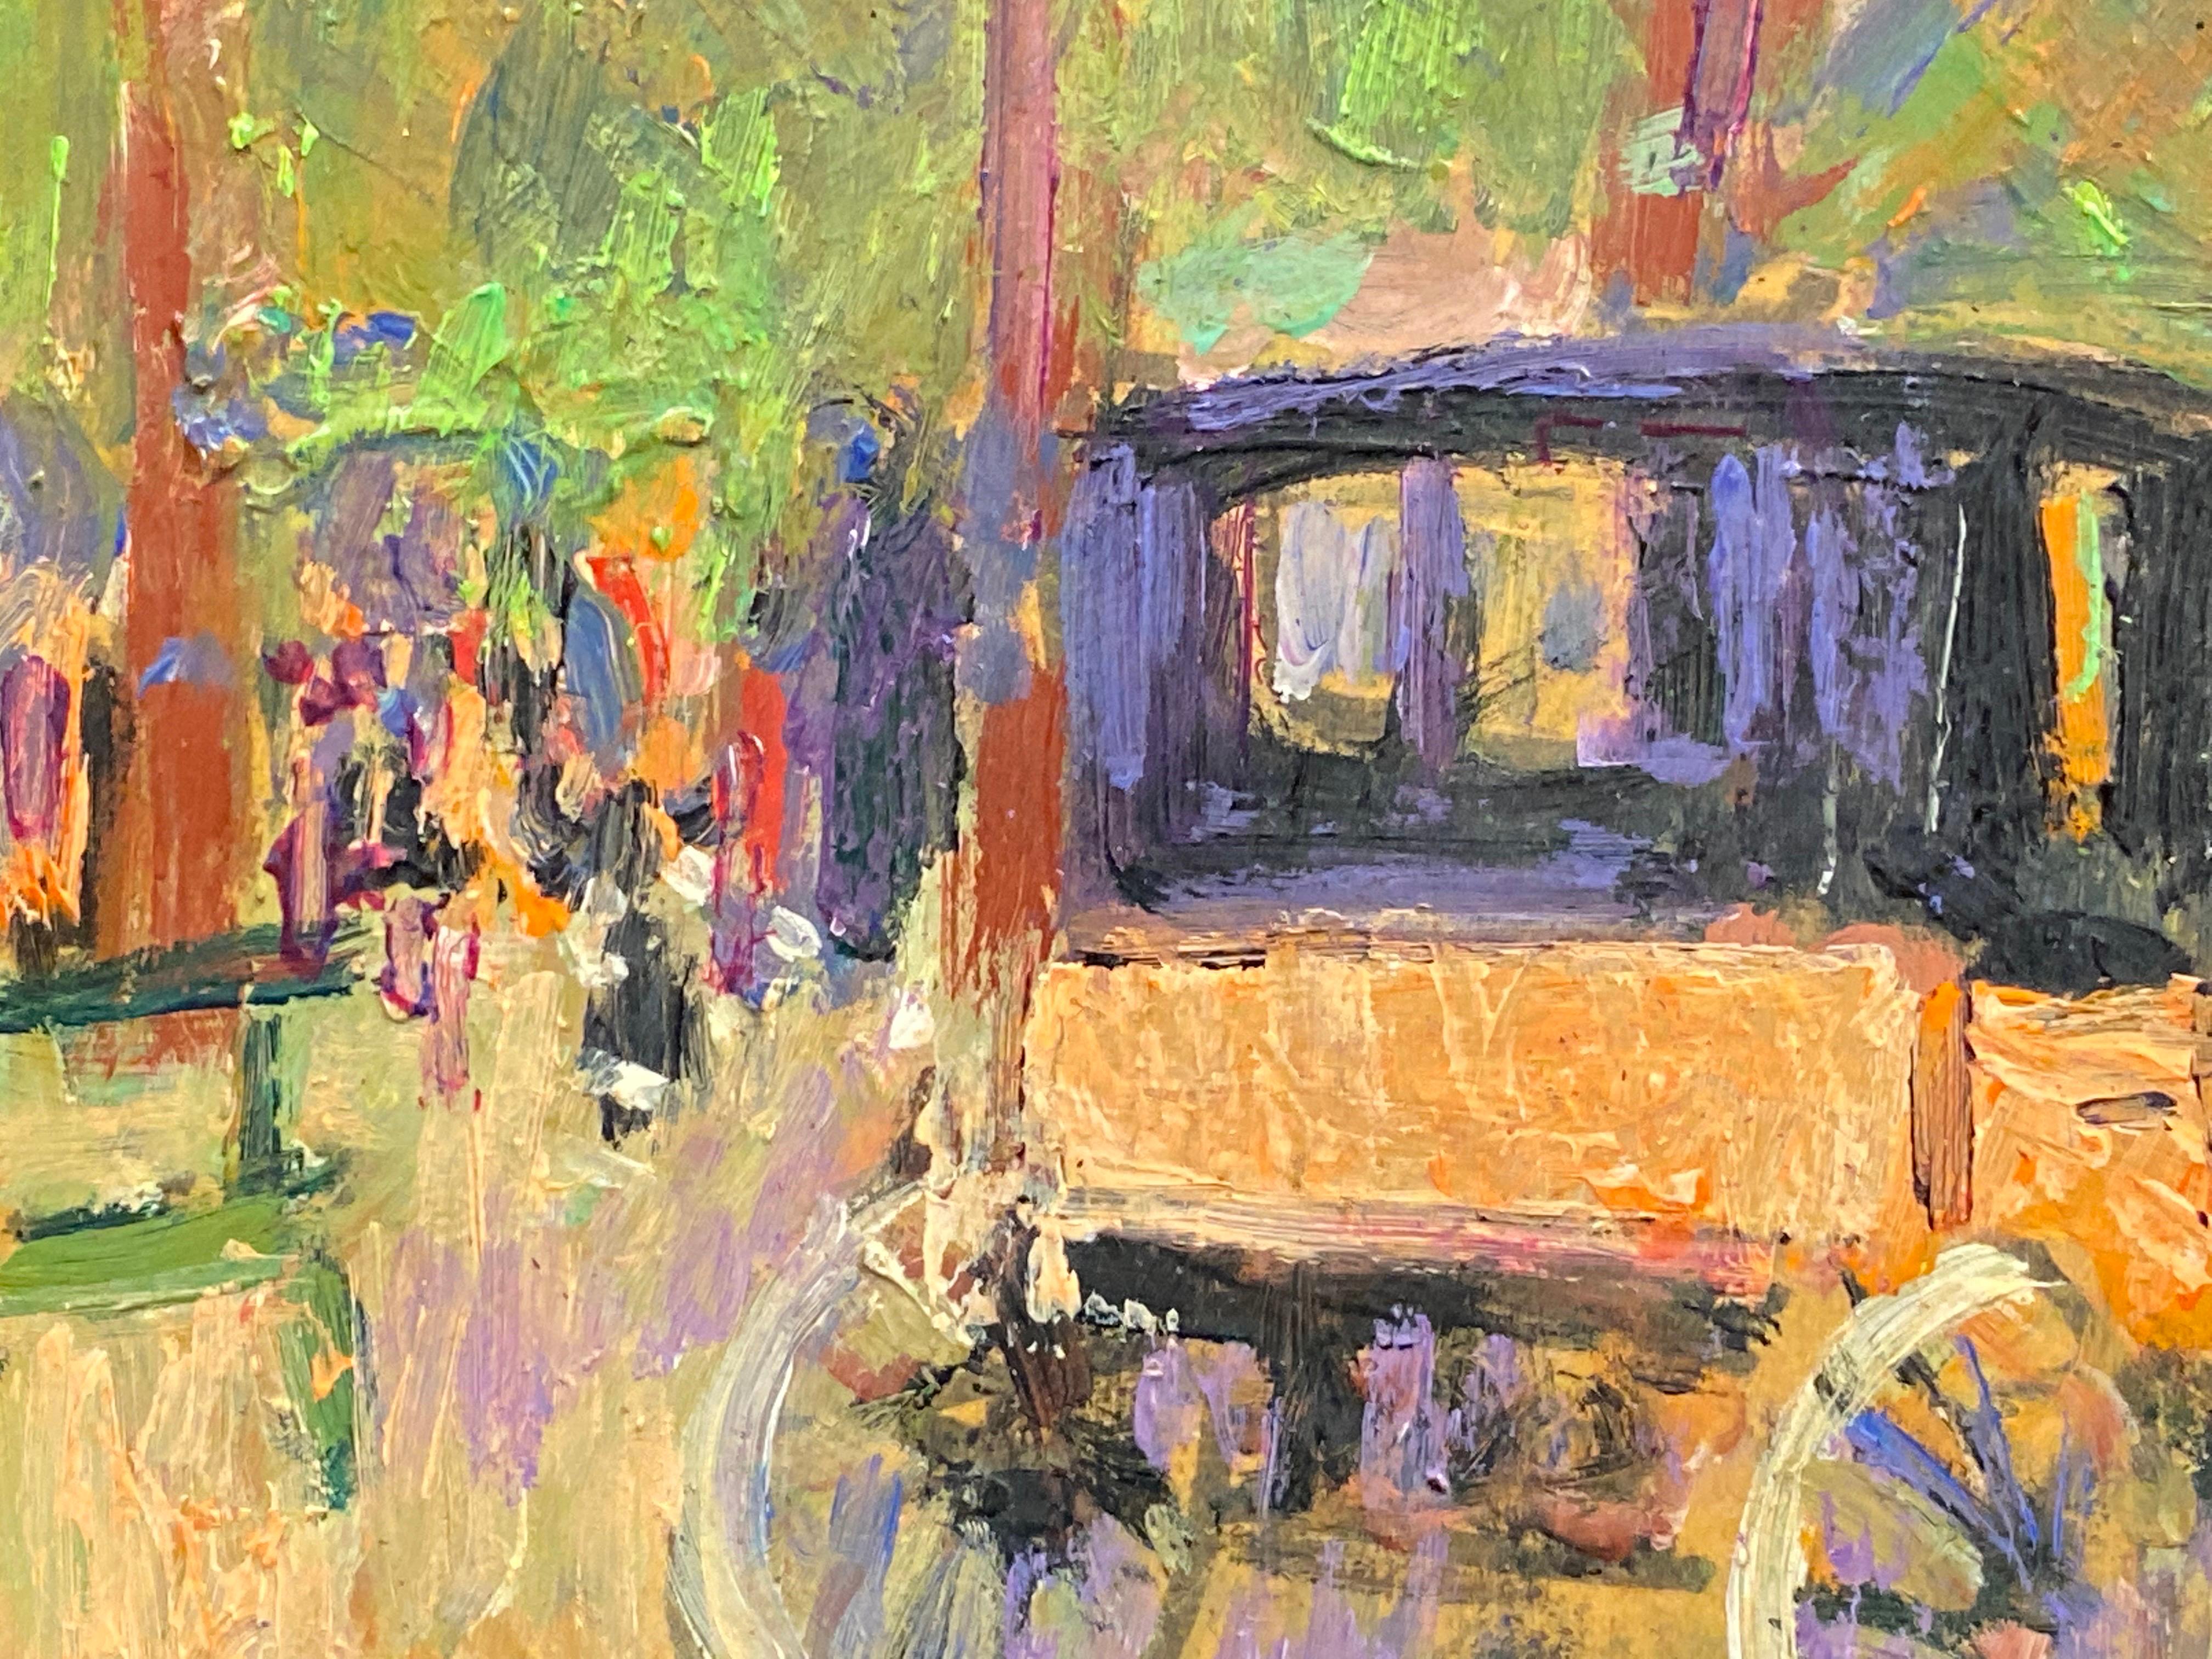 Artist/ School: Patrice Poindrelle (French b. 1954), signed

Title: Carriage in the Park

Medium: oil painting on board, unframed.

Size:  painting: 5.5 x 7 inches     

Provenance: private collection, Paris. 

Condition: The painting is in very